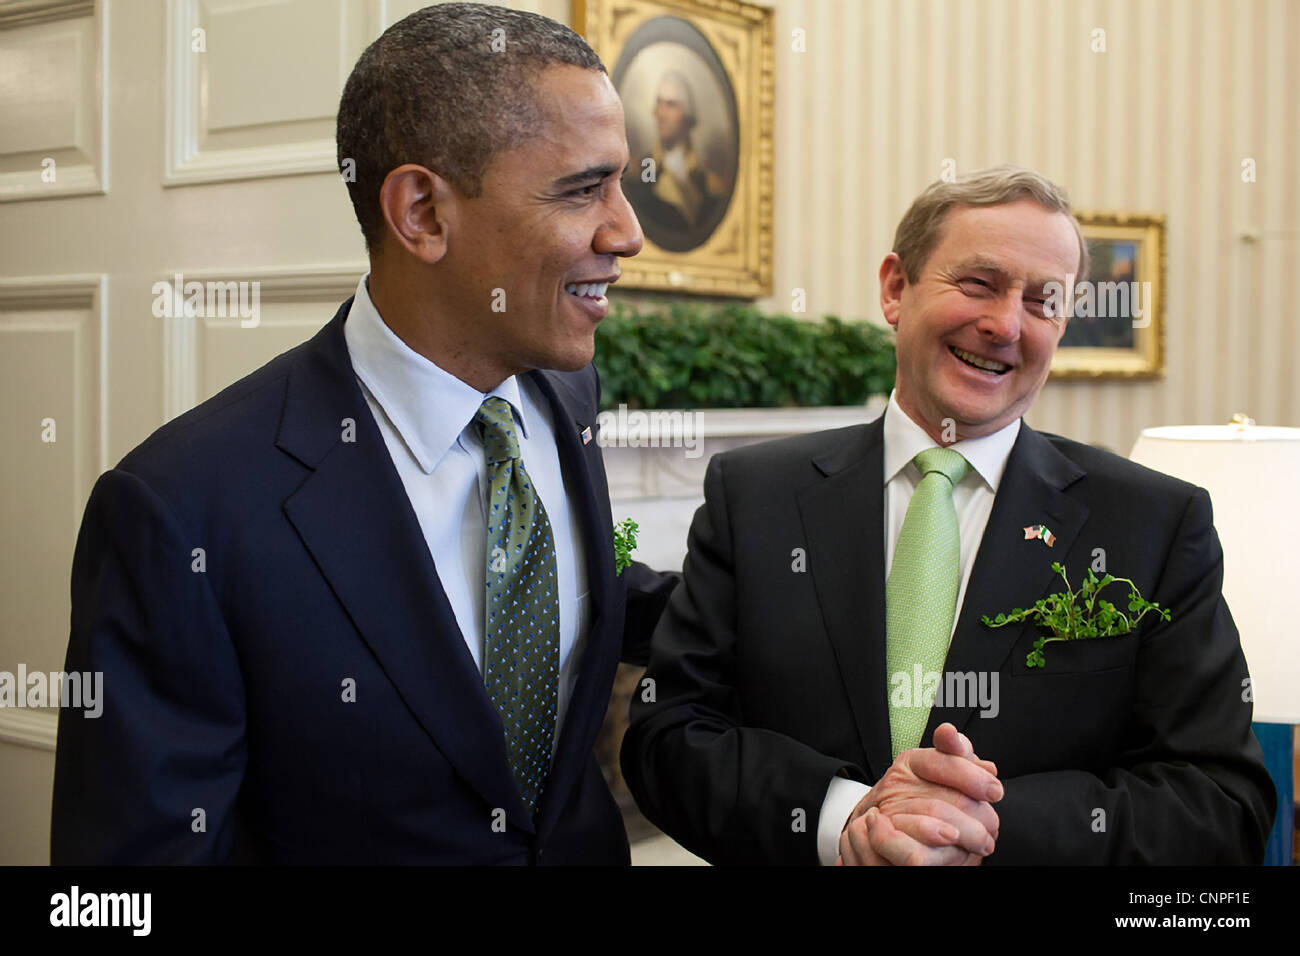 President Barack Obama greets Taoiseach Enda Kenny of Ireland during a meeting in the Oval Office, March 20, 2012 in Washington, DC. Stock Photo